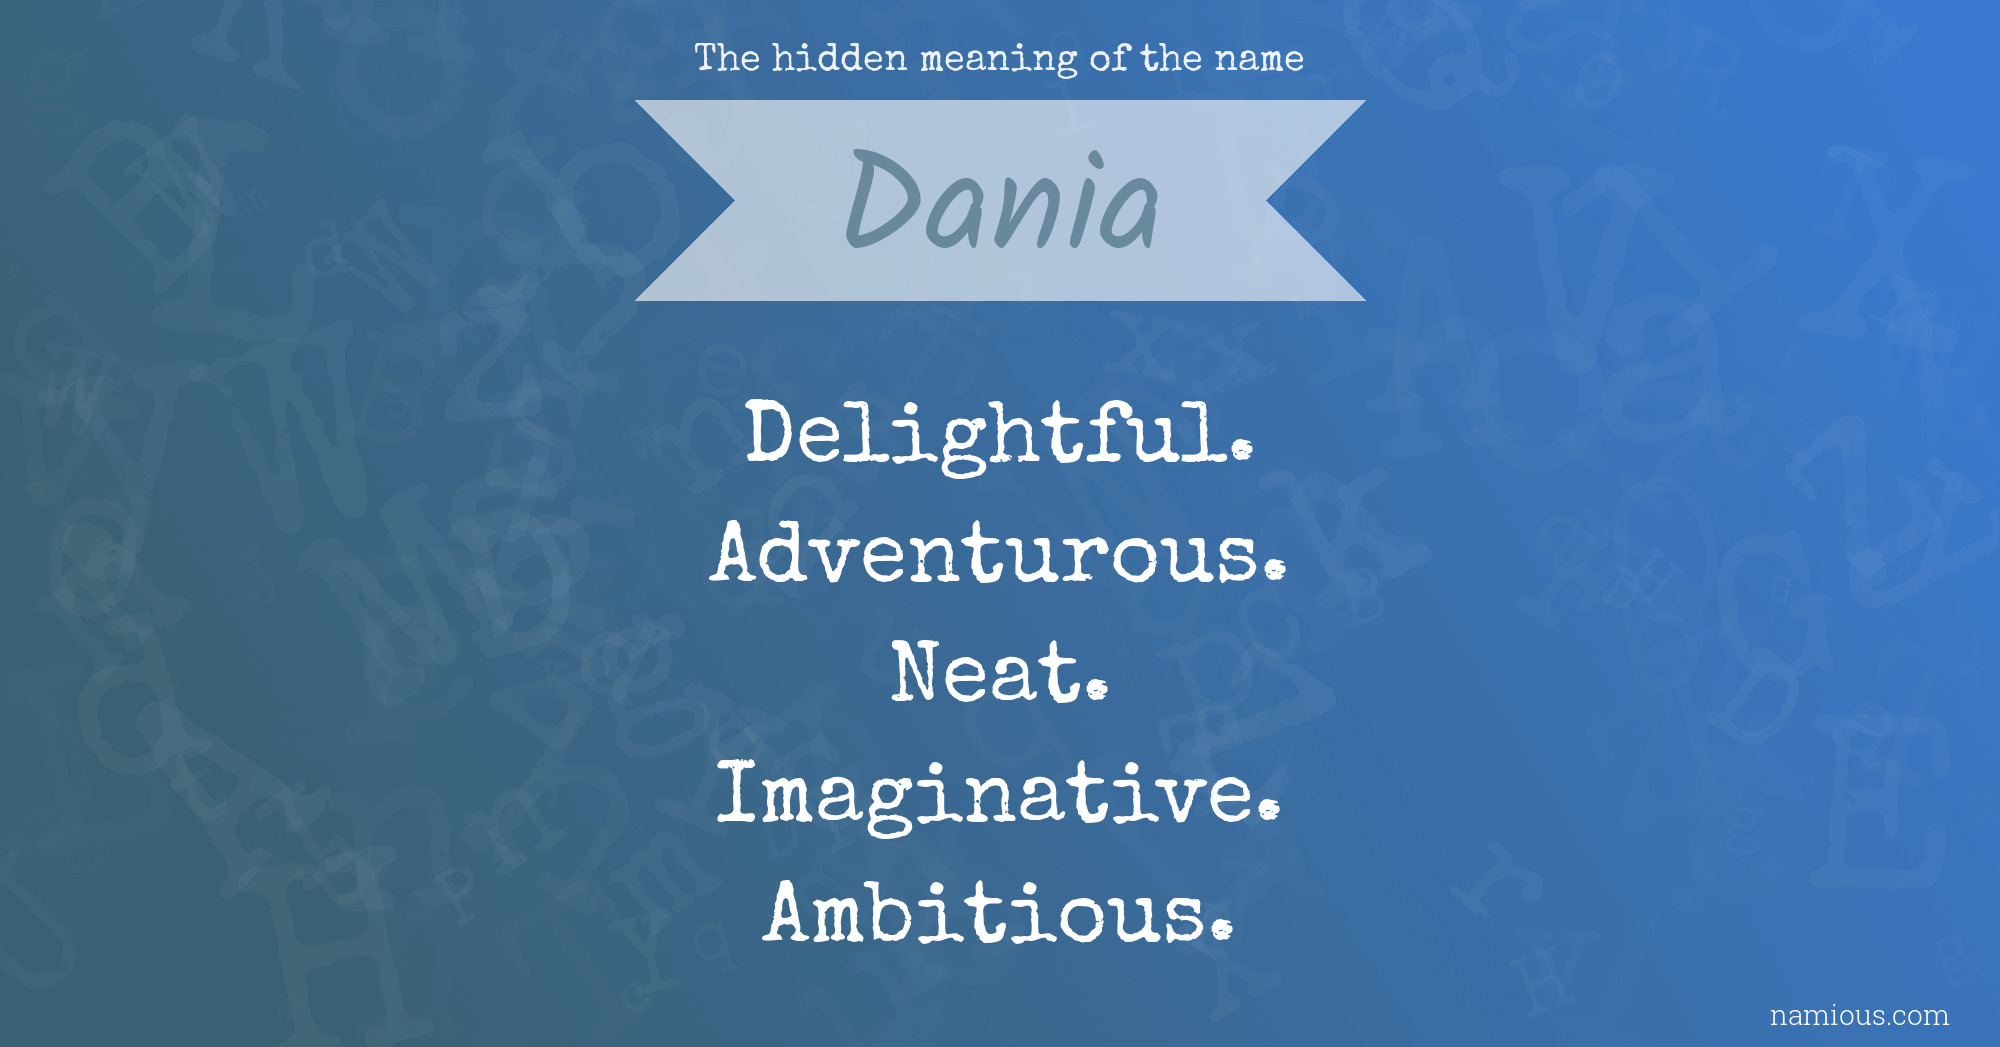 The hidden meaning of the name Dania